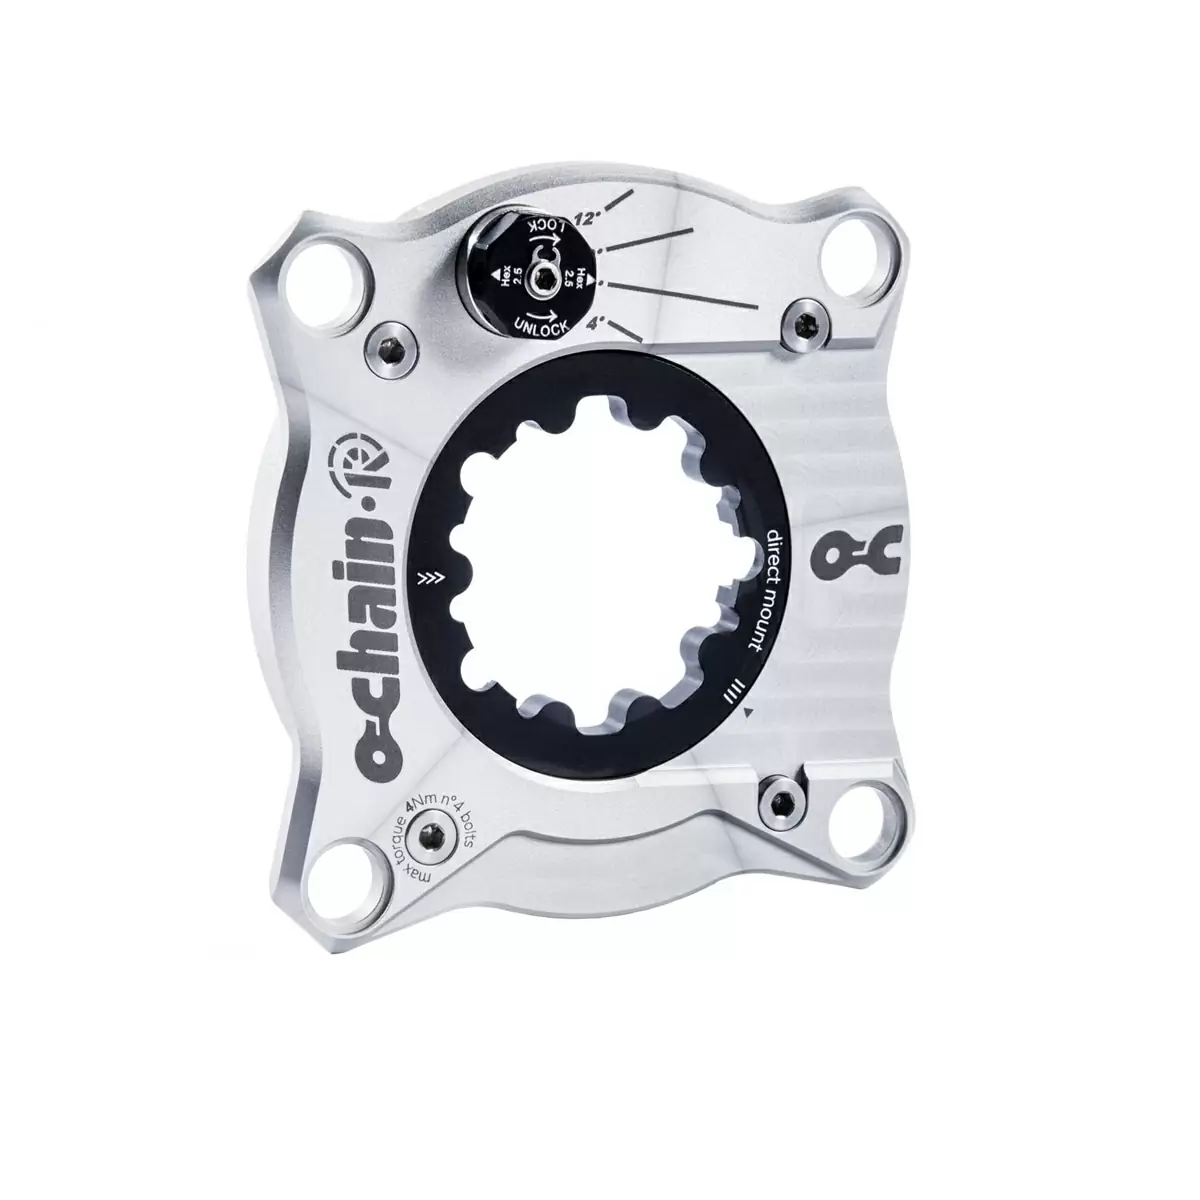 Active Spider R With Direct Mount Adjustment for Shimano Pregio - image